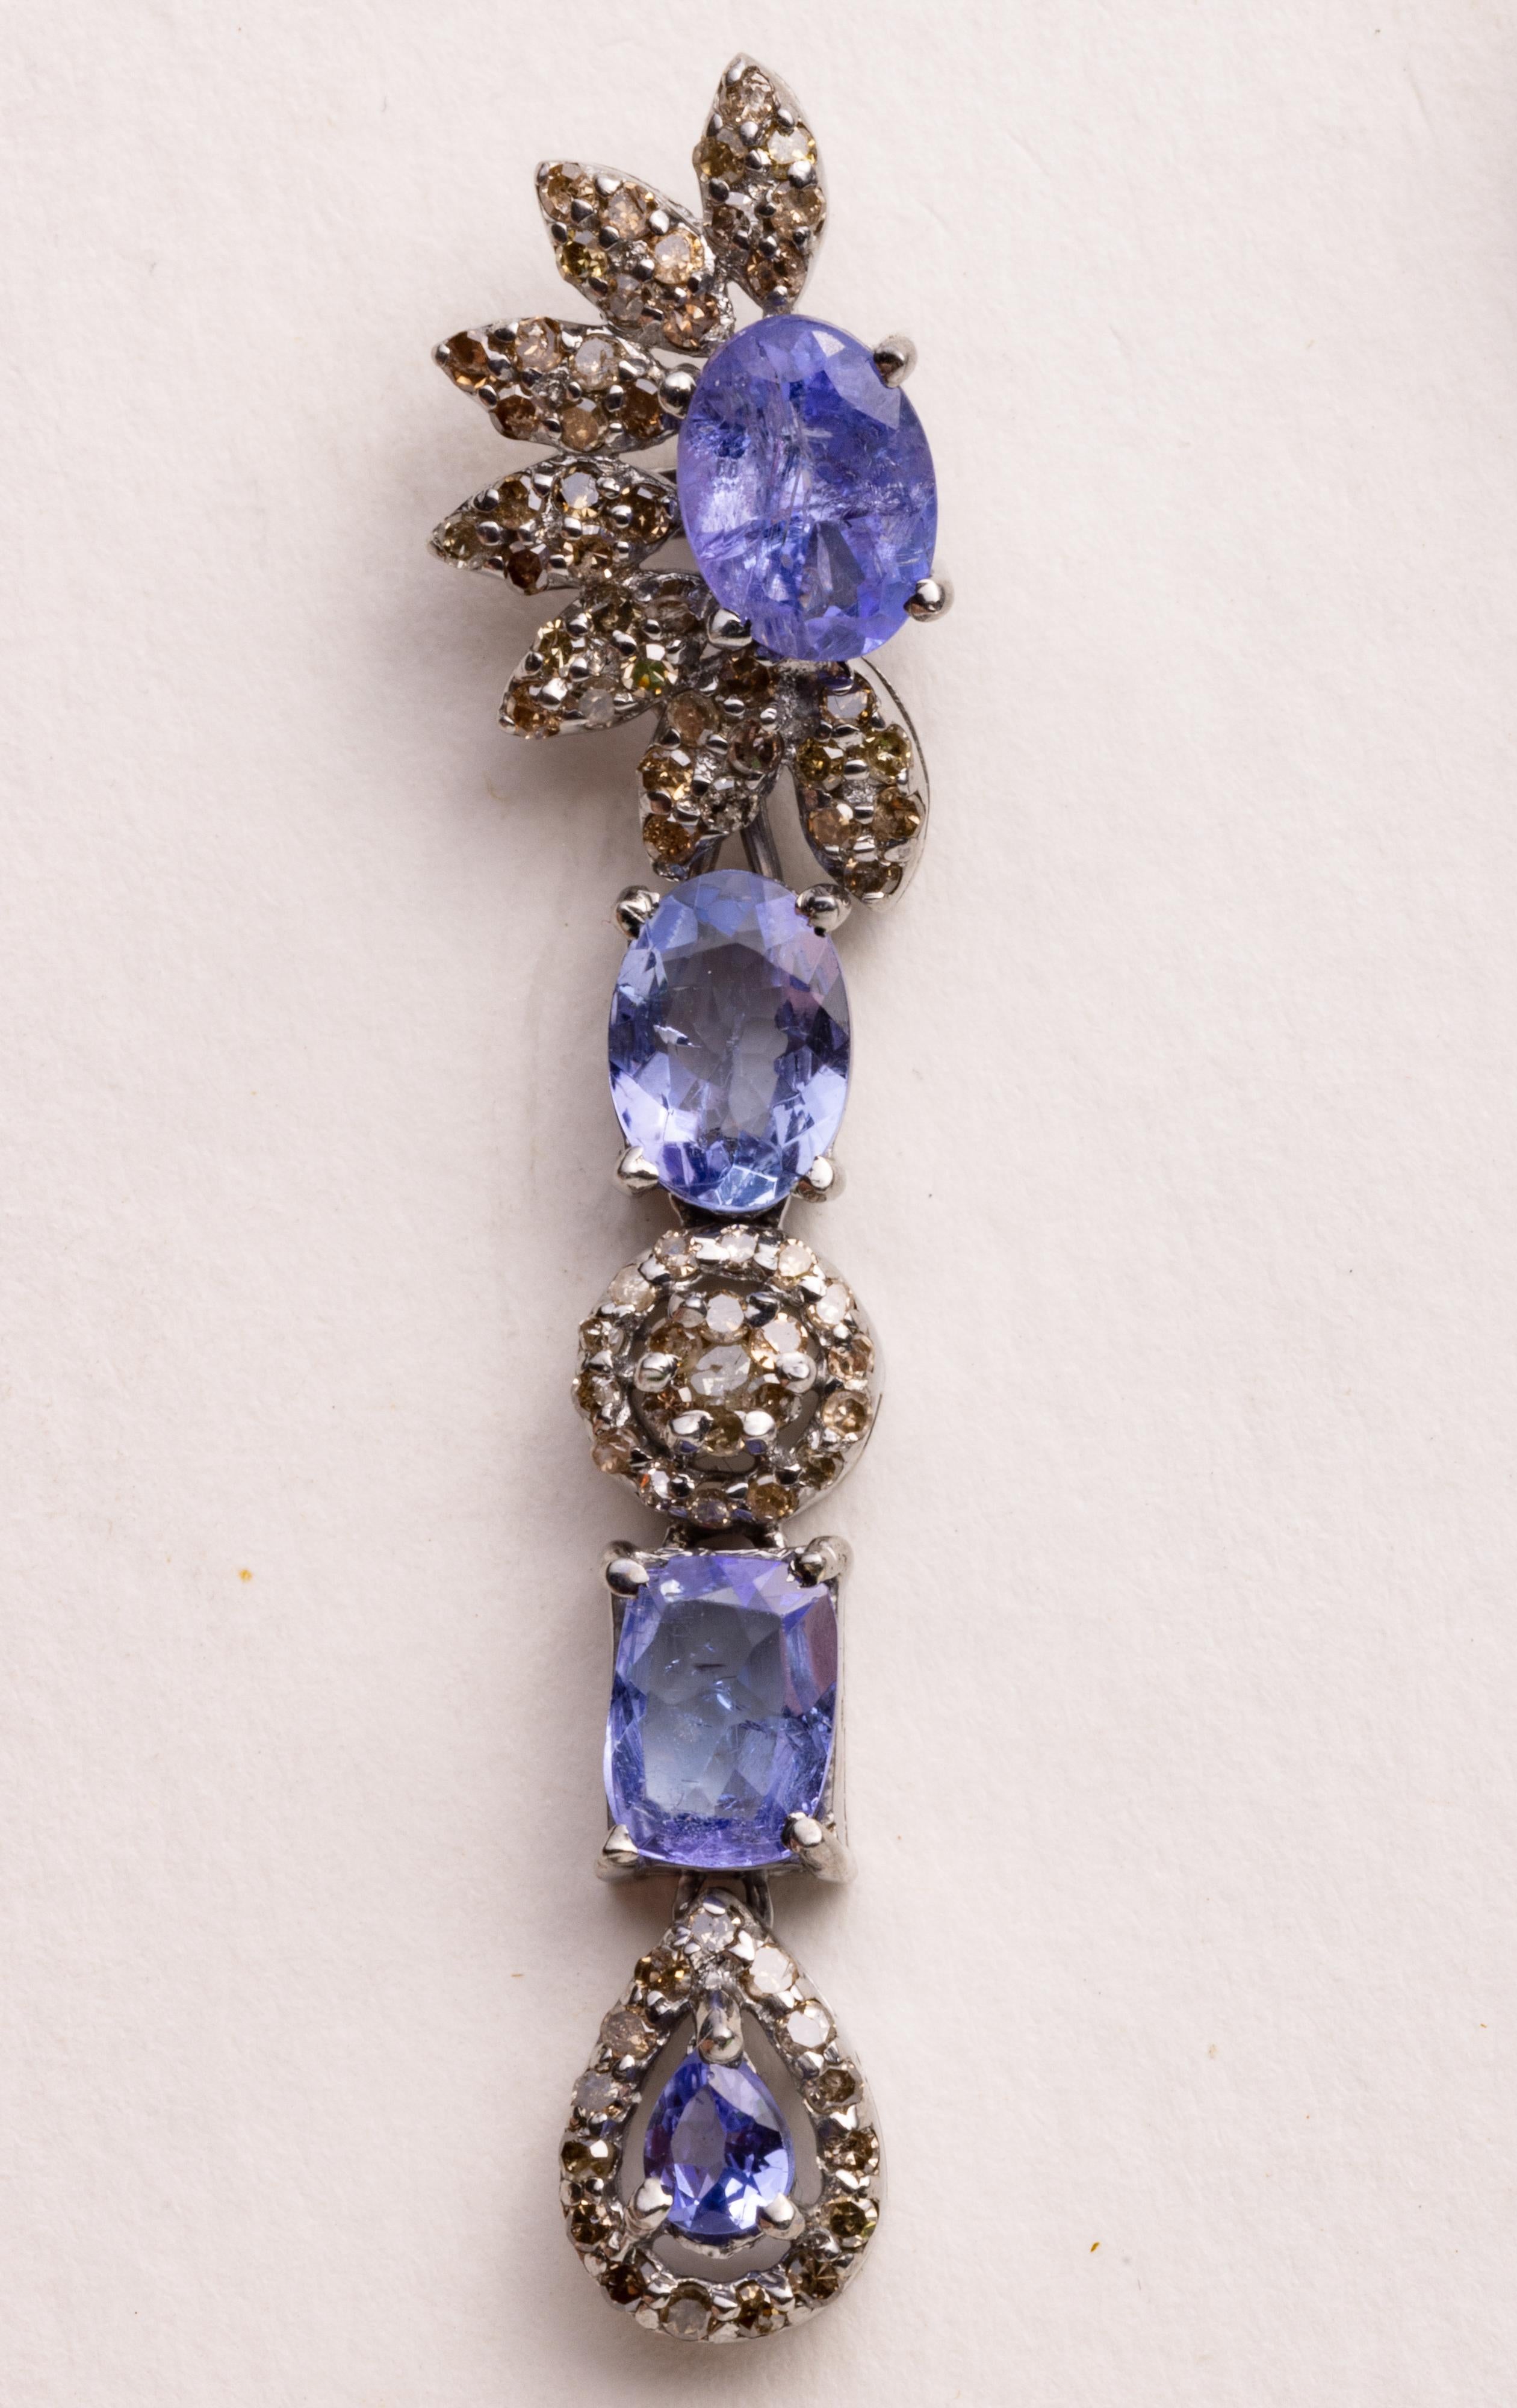 Unusual dangle earrings featuring oval and pear-shaped faceted Tanzanite gemstones with round, brilliant cut diamonds in a pave` setting.  Sterling silver with 18K gold post for pierced ears.  carat weight of diamonds totals 1.12, Tanzanite gems